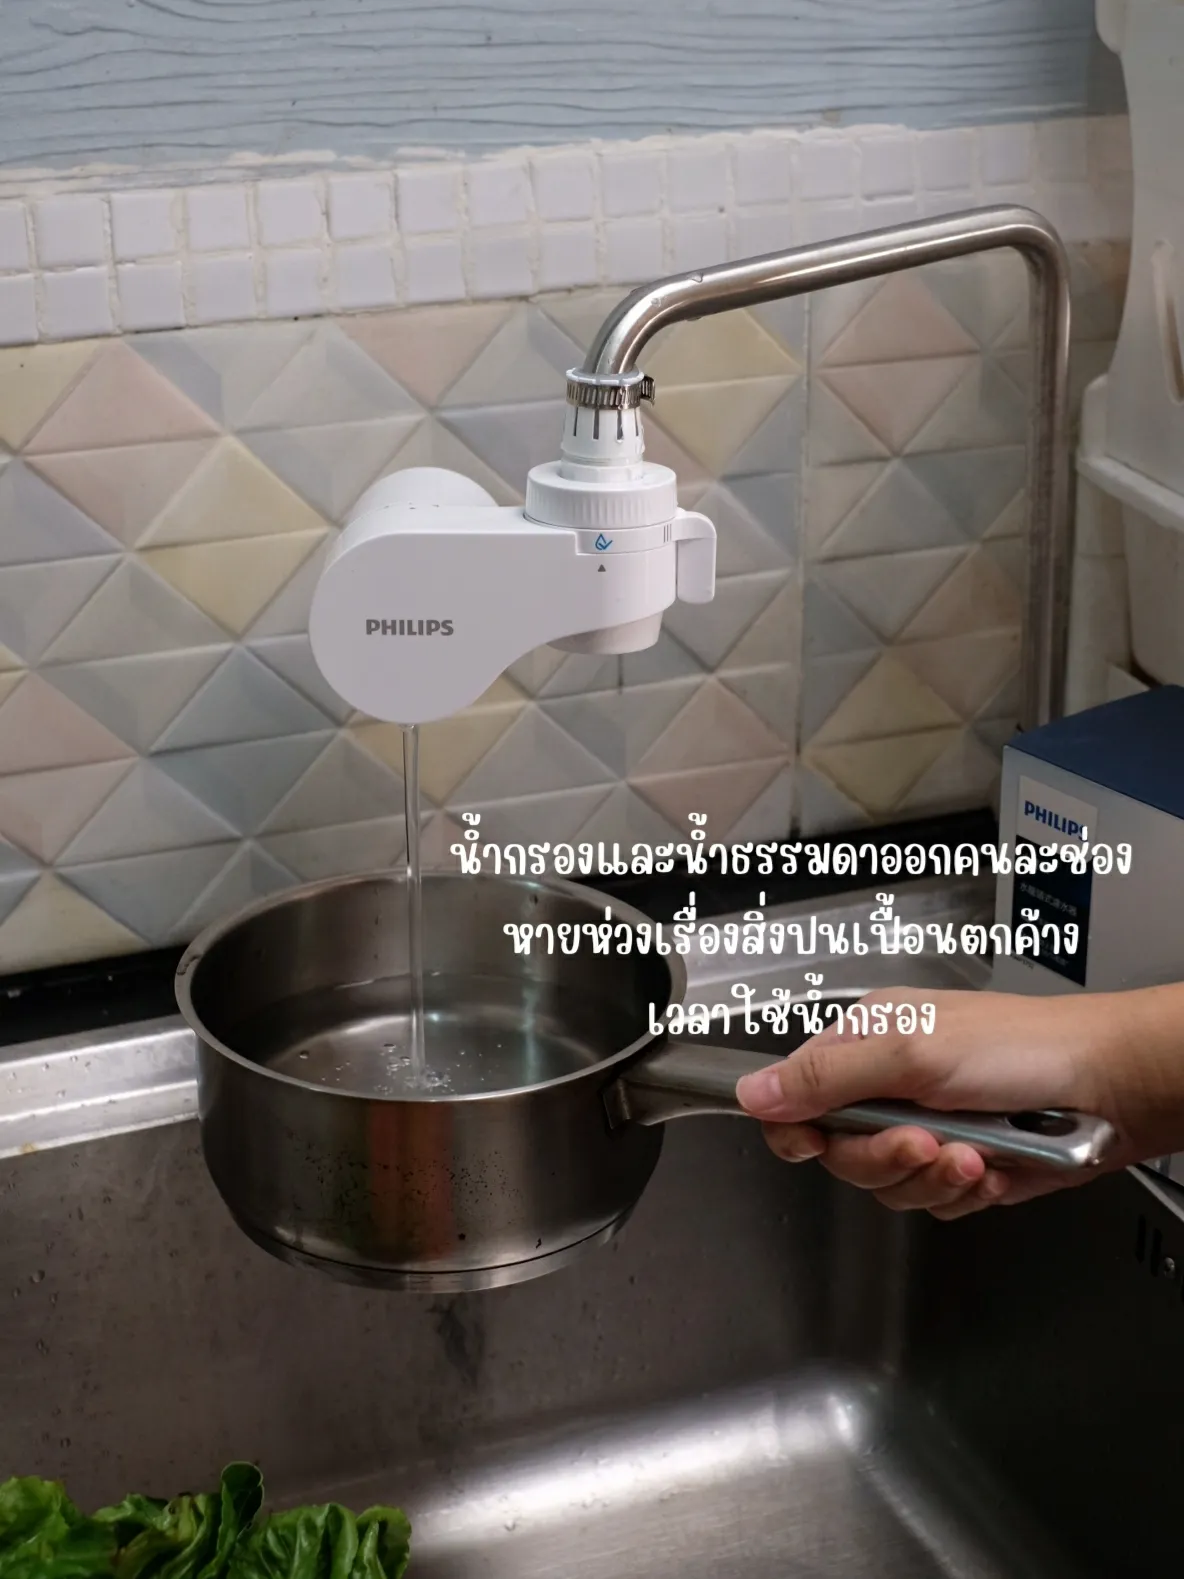 Philips X-Guard Water Filter Faucet Head Review AWP3752, Gallery posted by  คุณแม่อยากเล่า